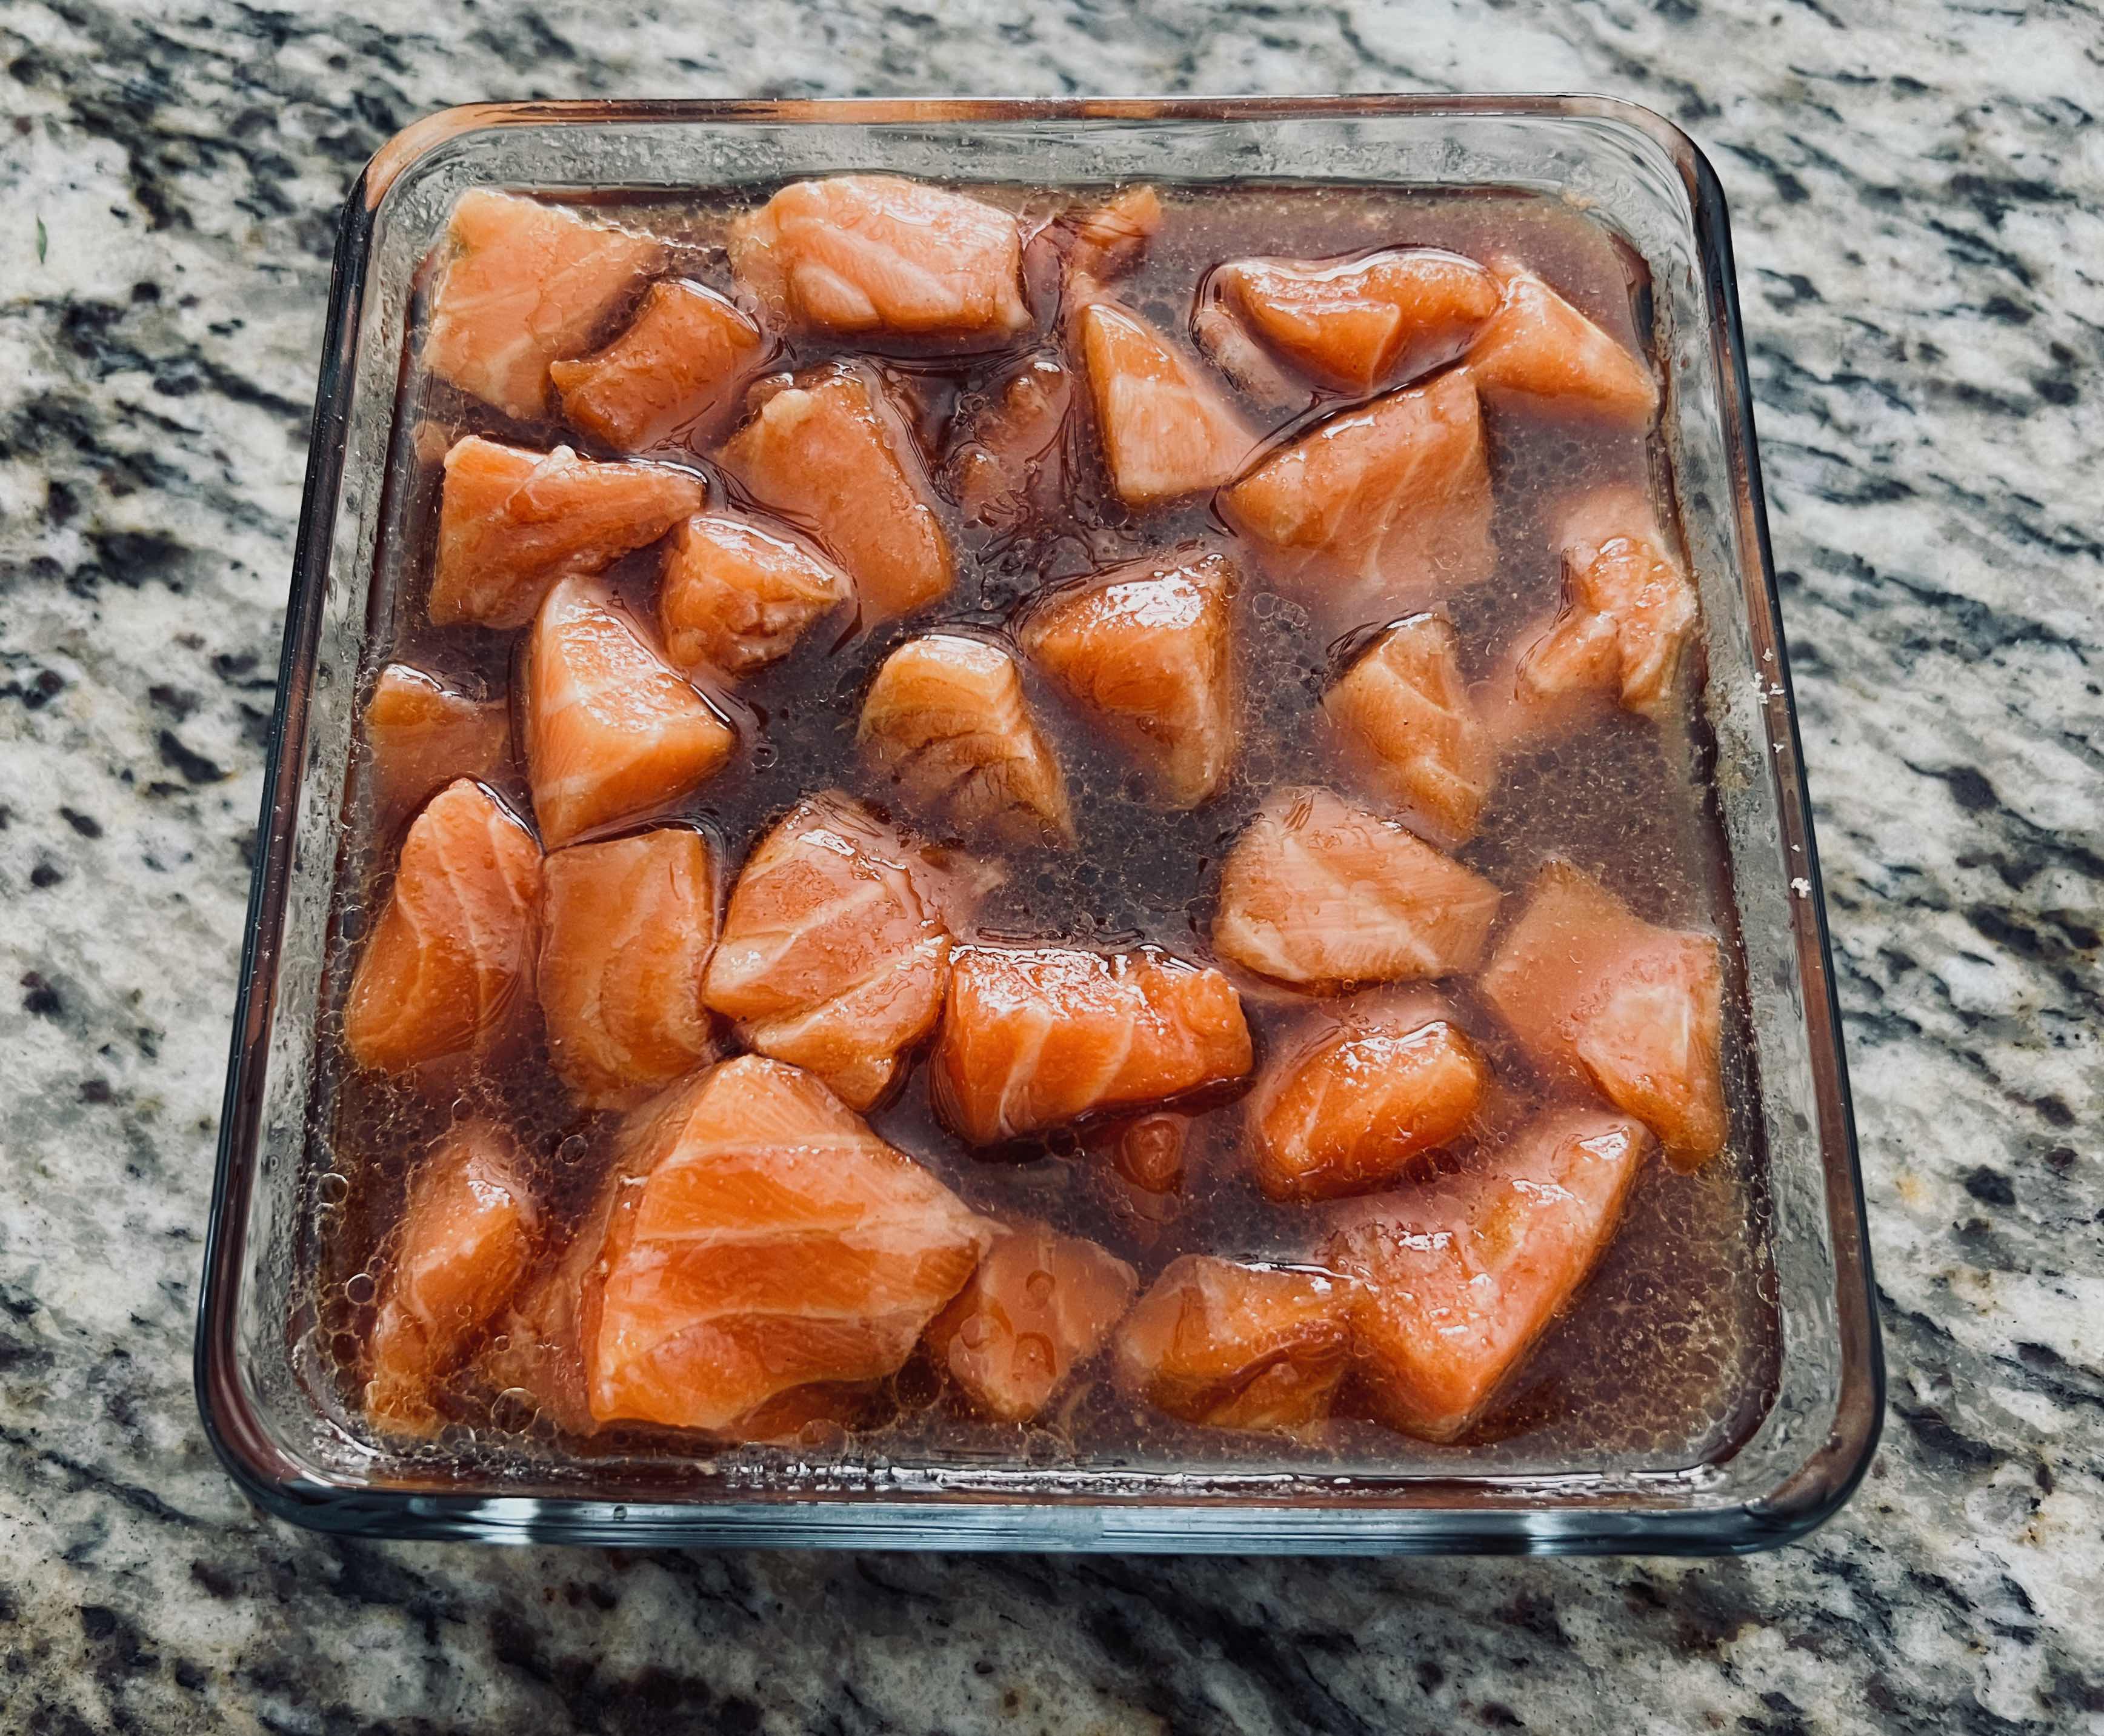 Cubed salmon in marinade